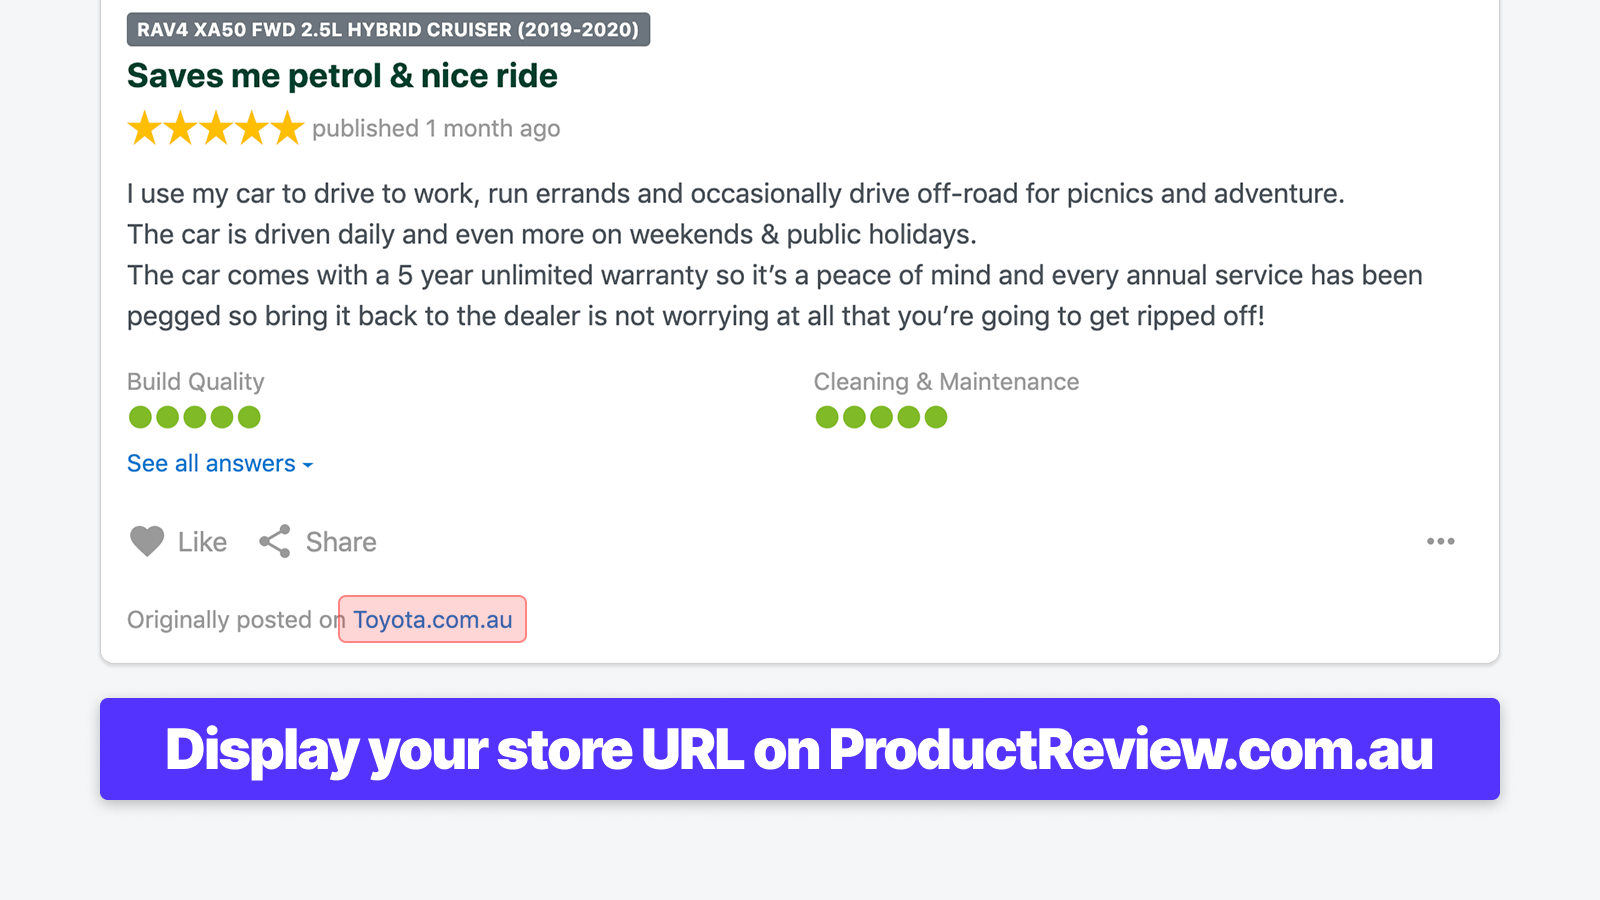 Display your store URL on ProductReview.com.au